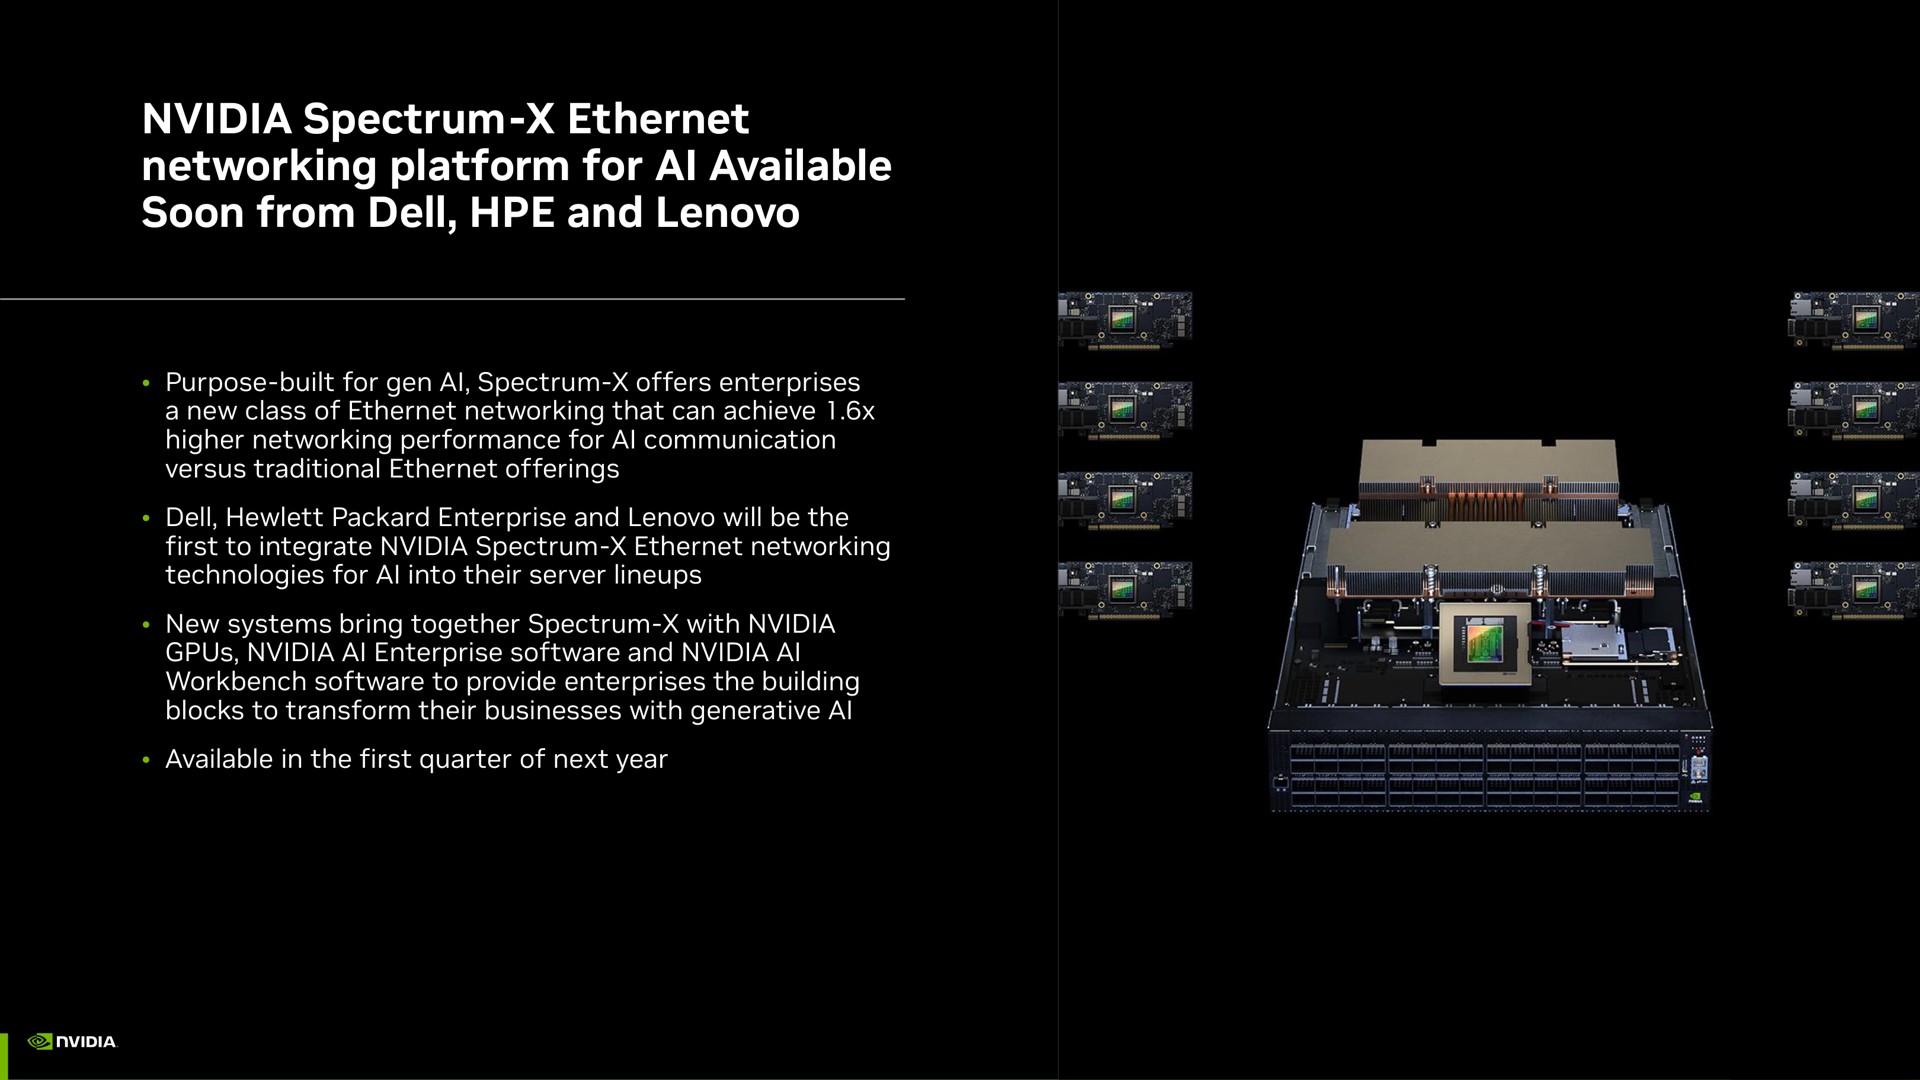 spectrum networking platform for available soon from dell and | NVIDIA